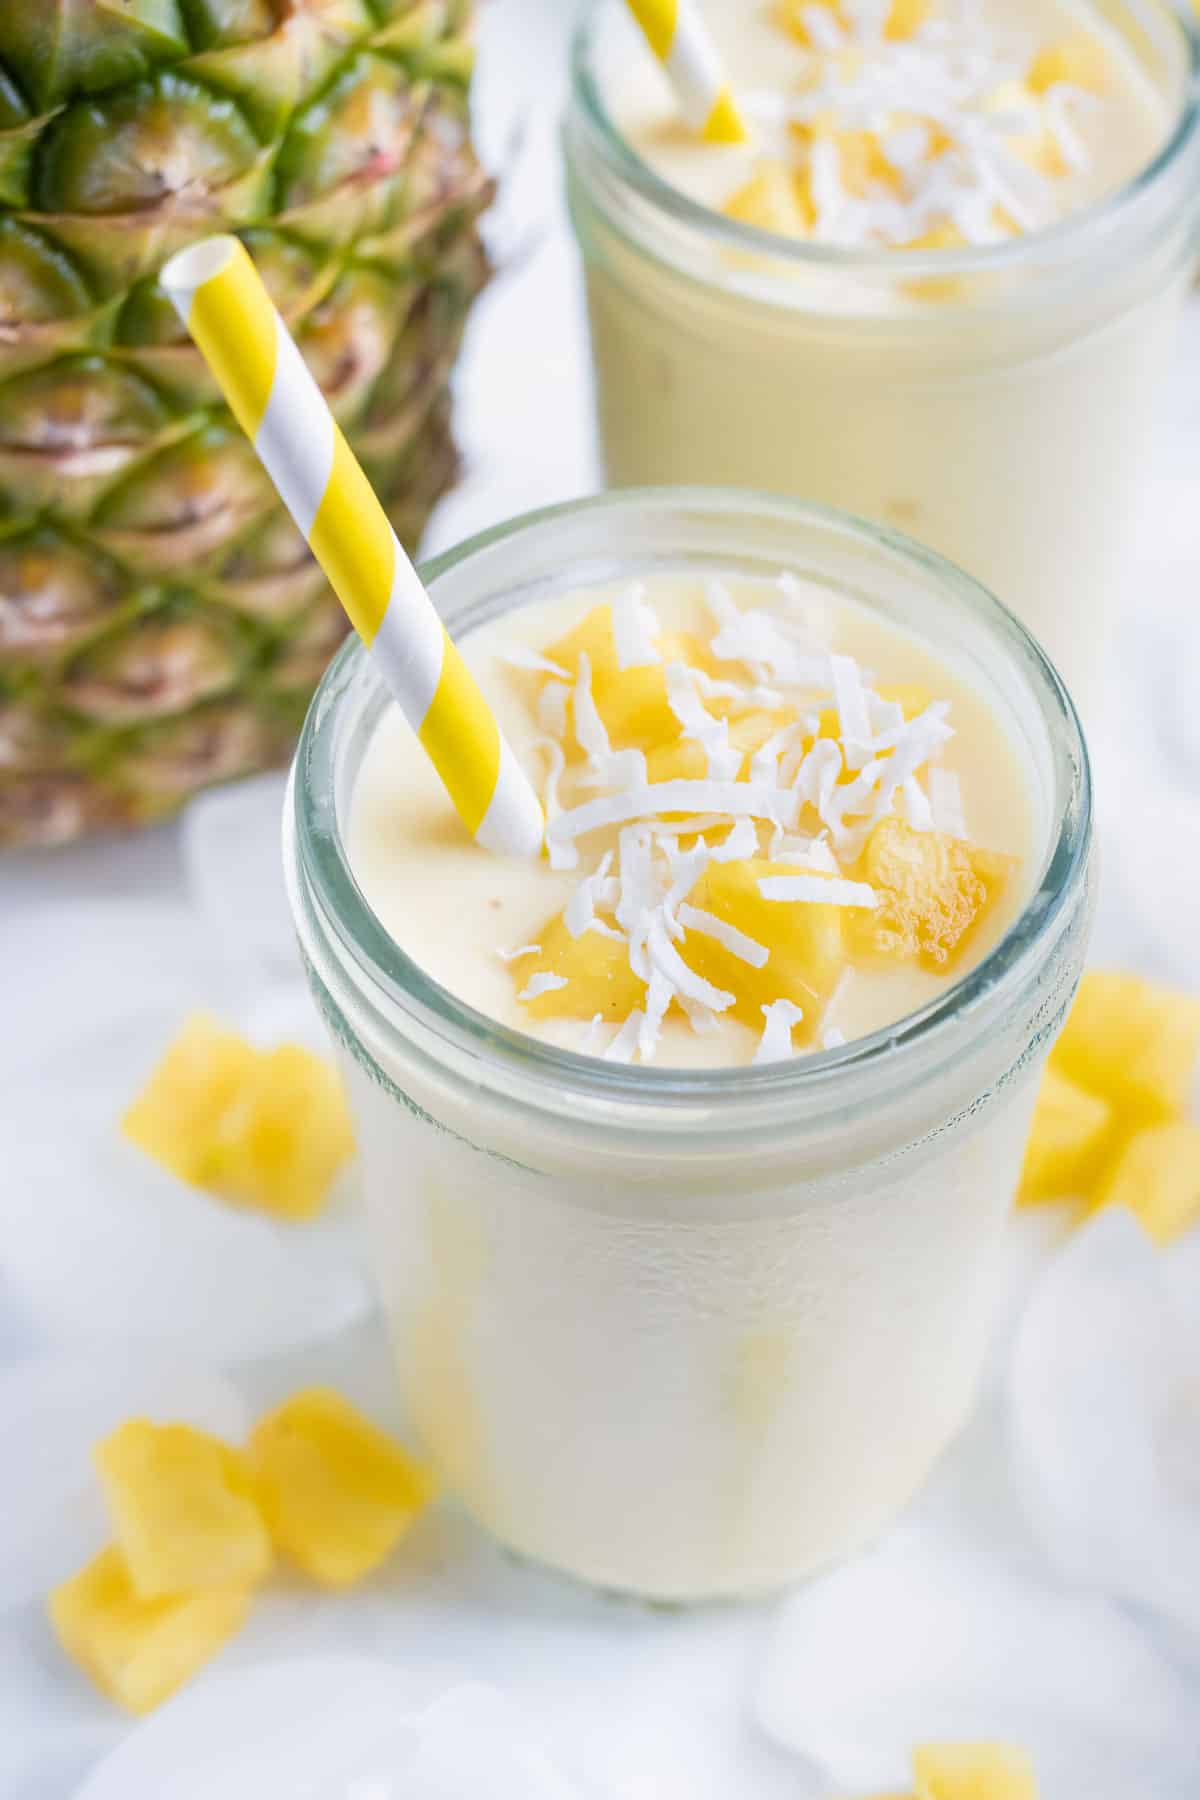 Pineapple smoothie is topped with cubed pineapple and shredded coconut.